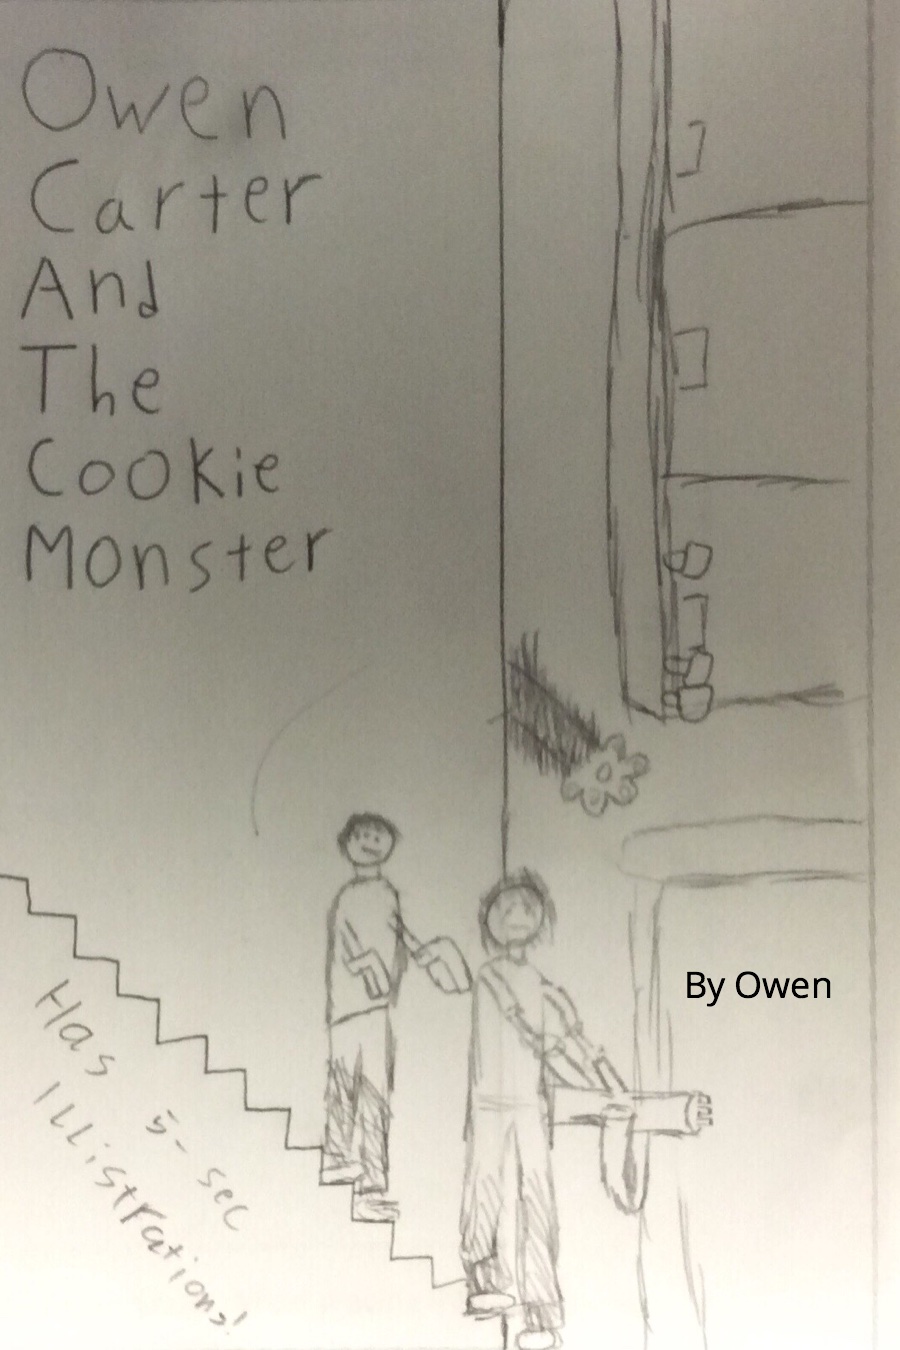 Owen Carter and the Cookie Monster by Owen D